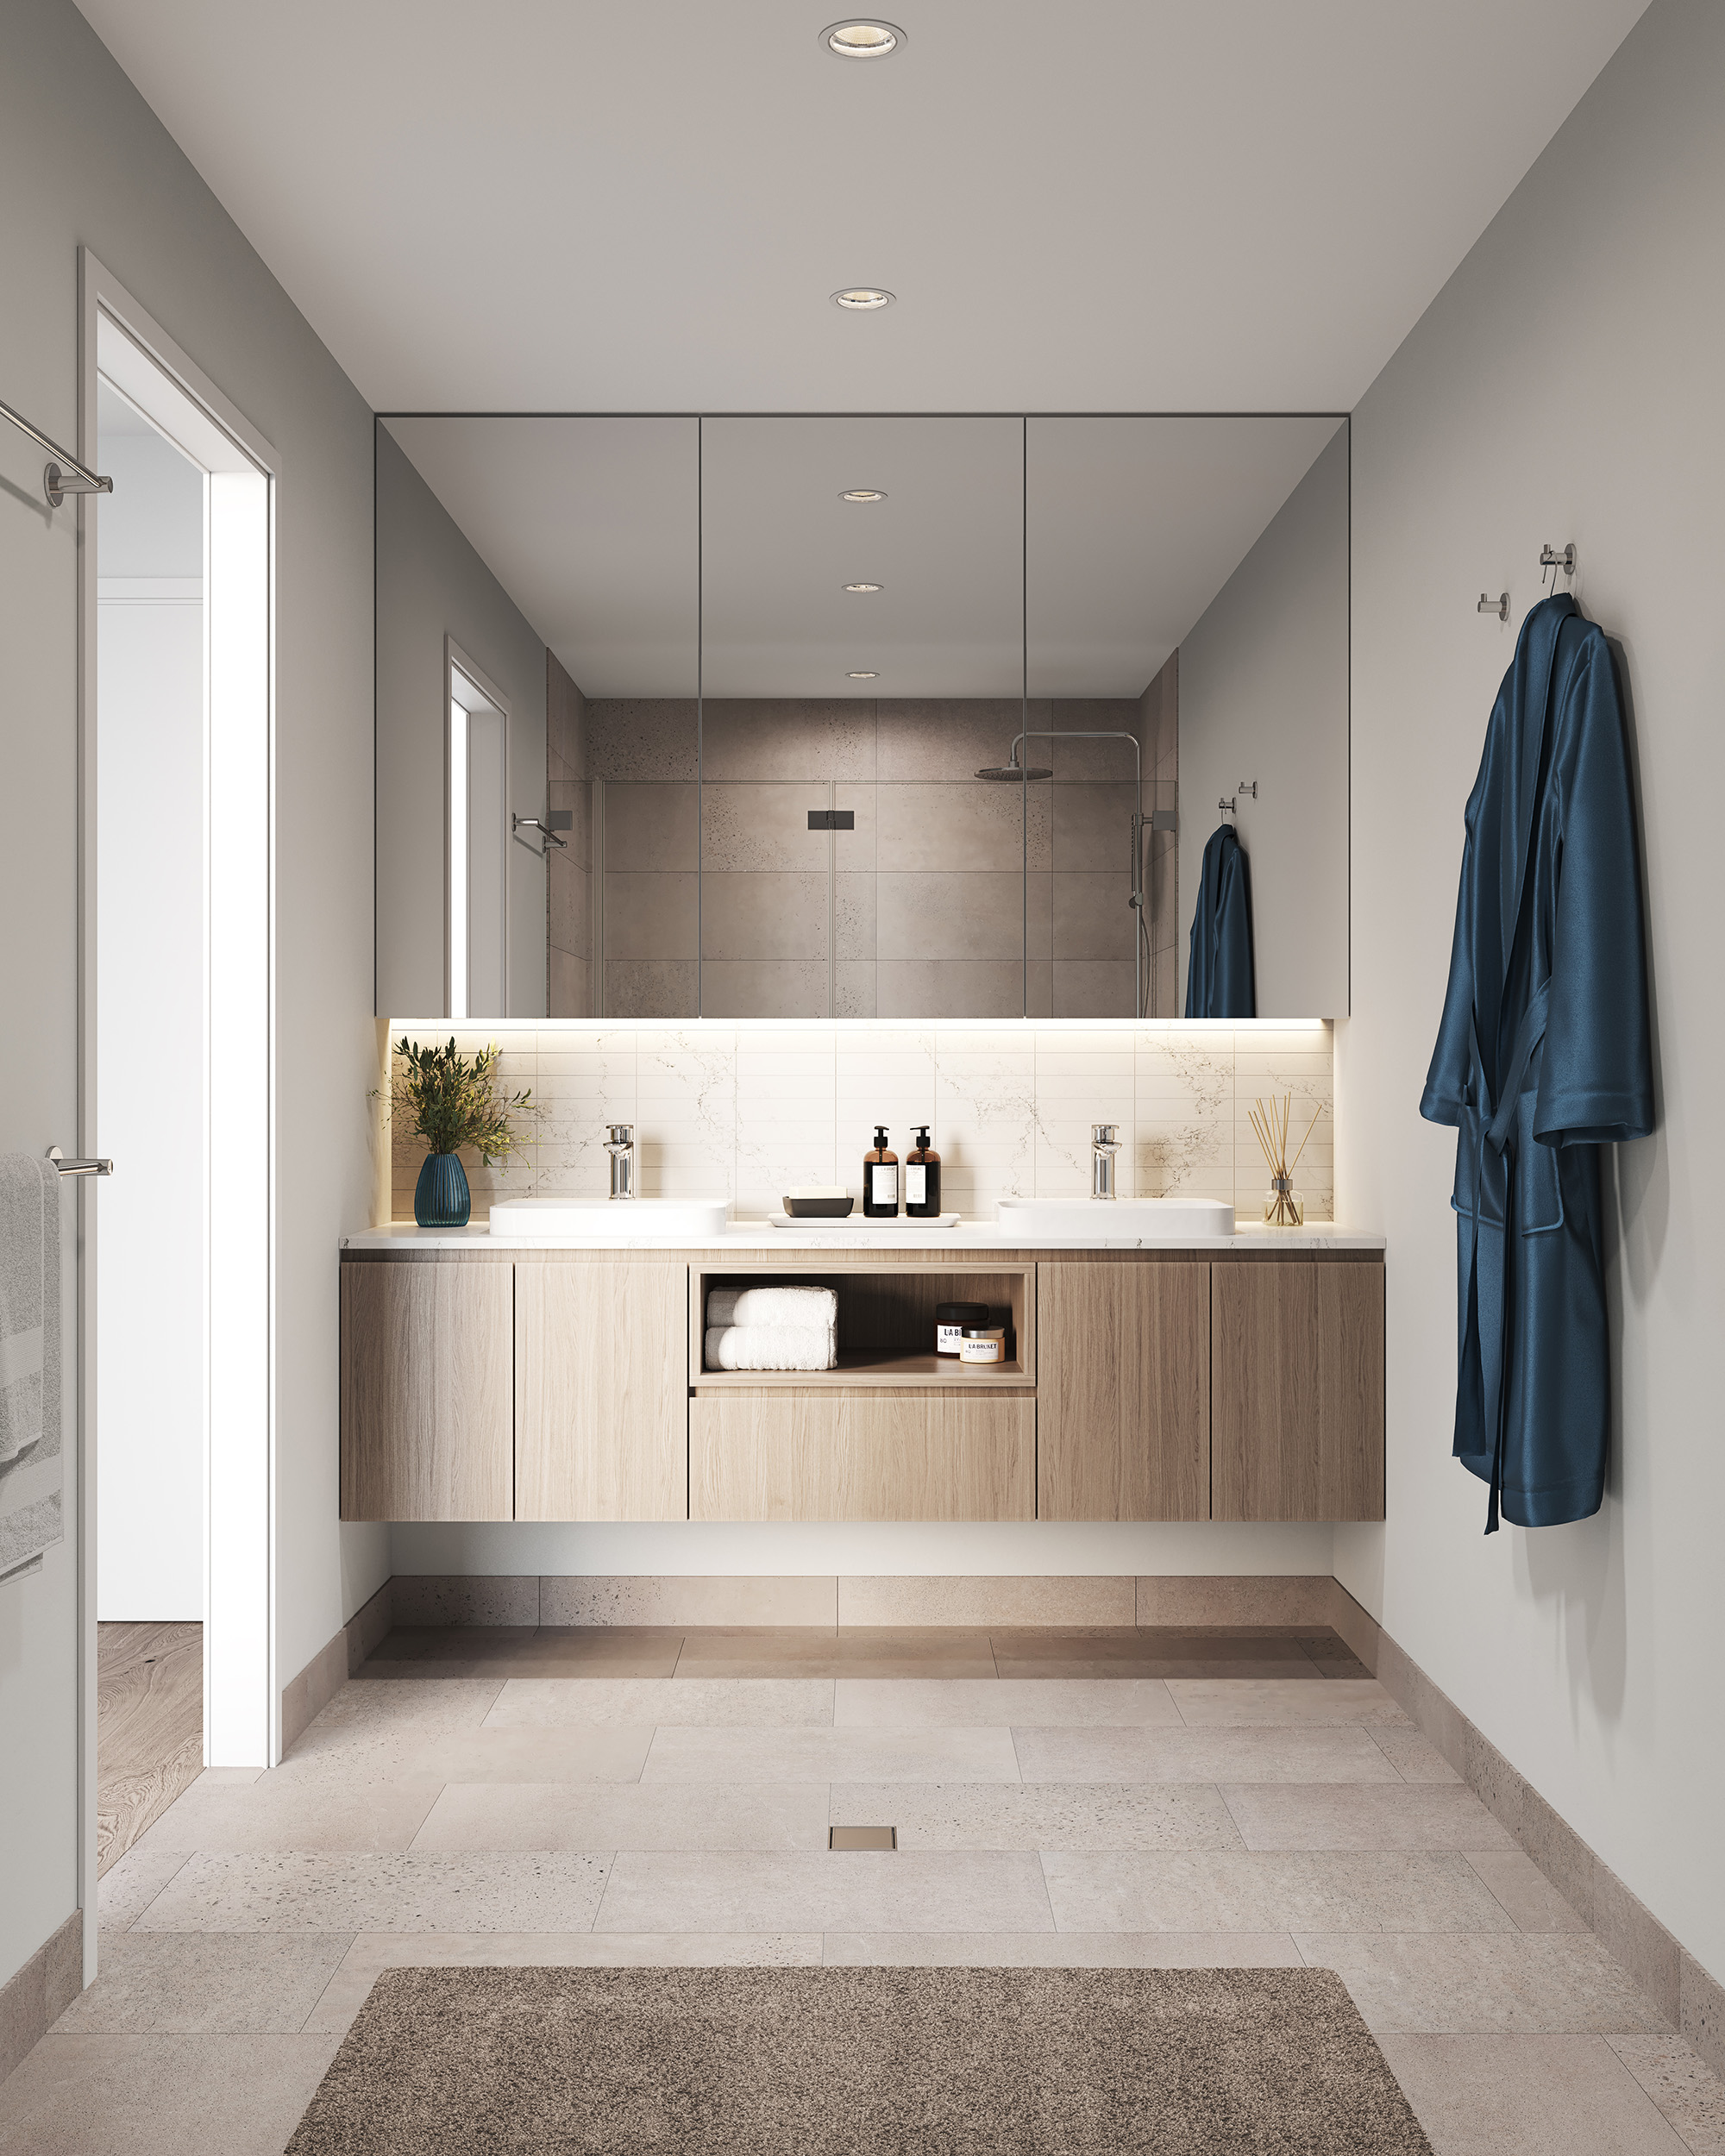 Image of a stylish bathroom vanity and mirror featuring light timber finishes and a light beige tiled floor.